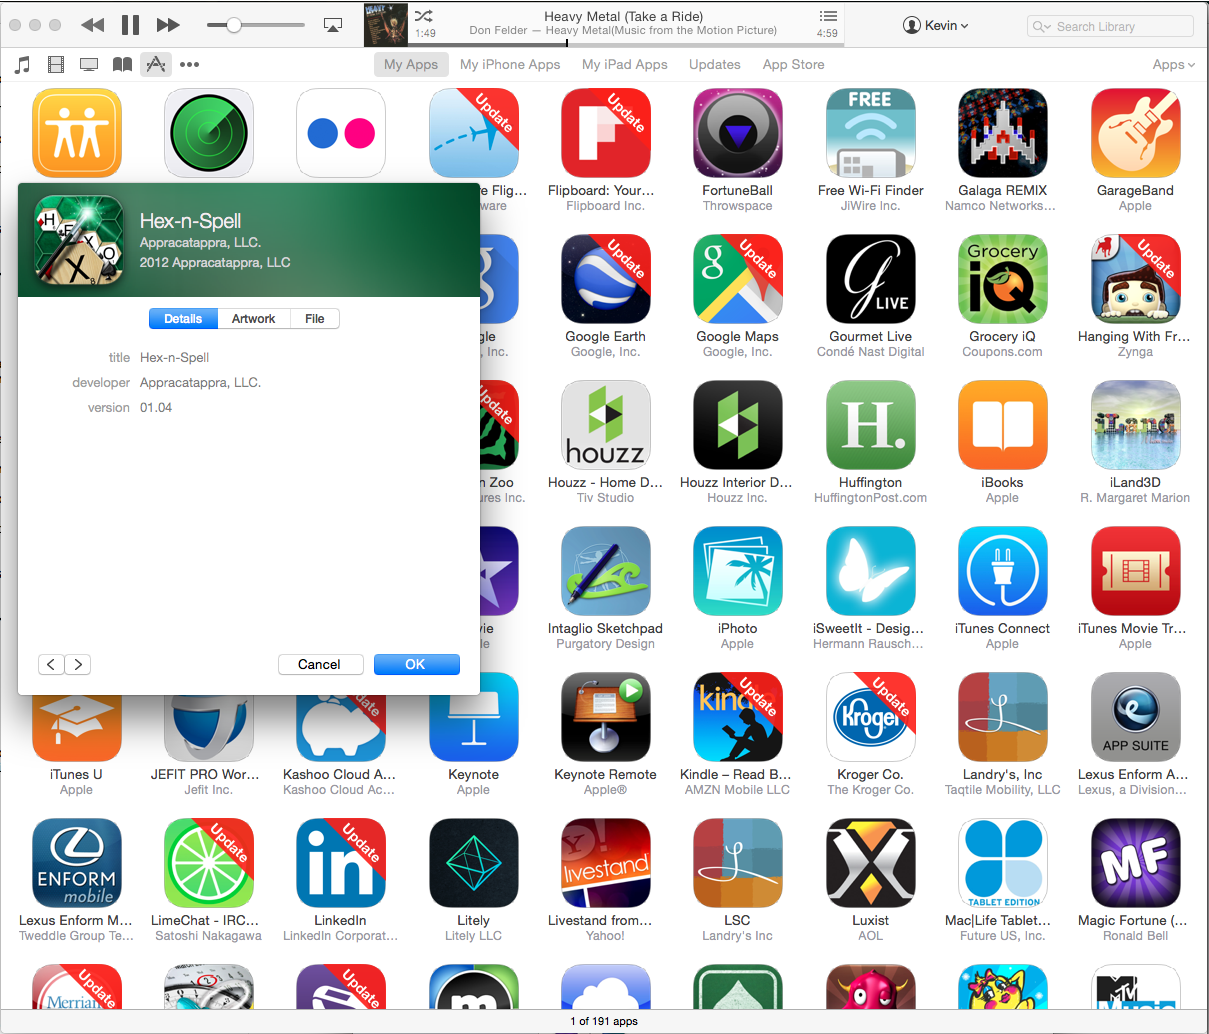 The new iOS application in the My Apps section